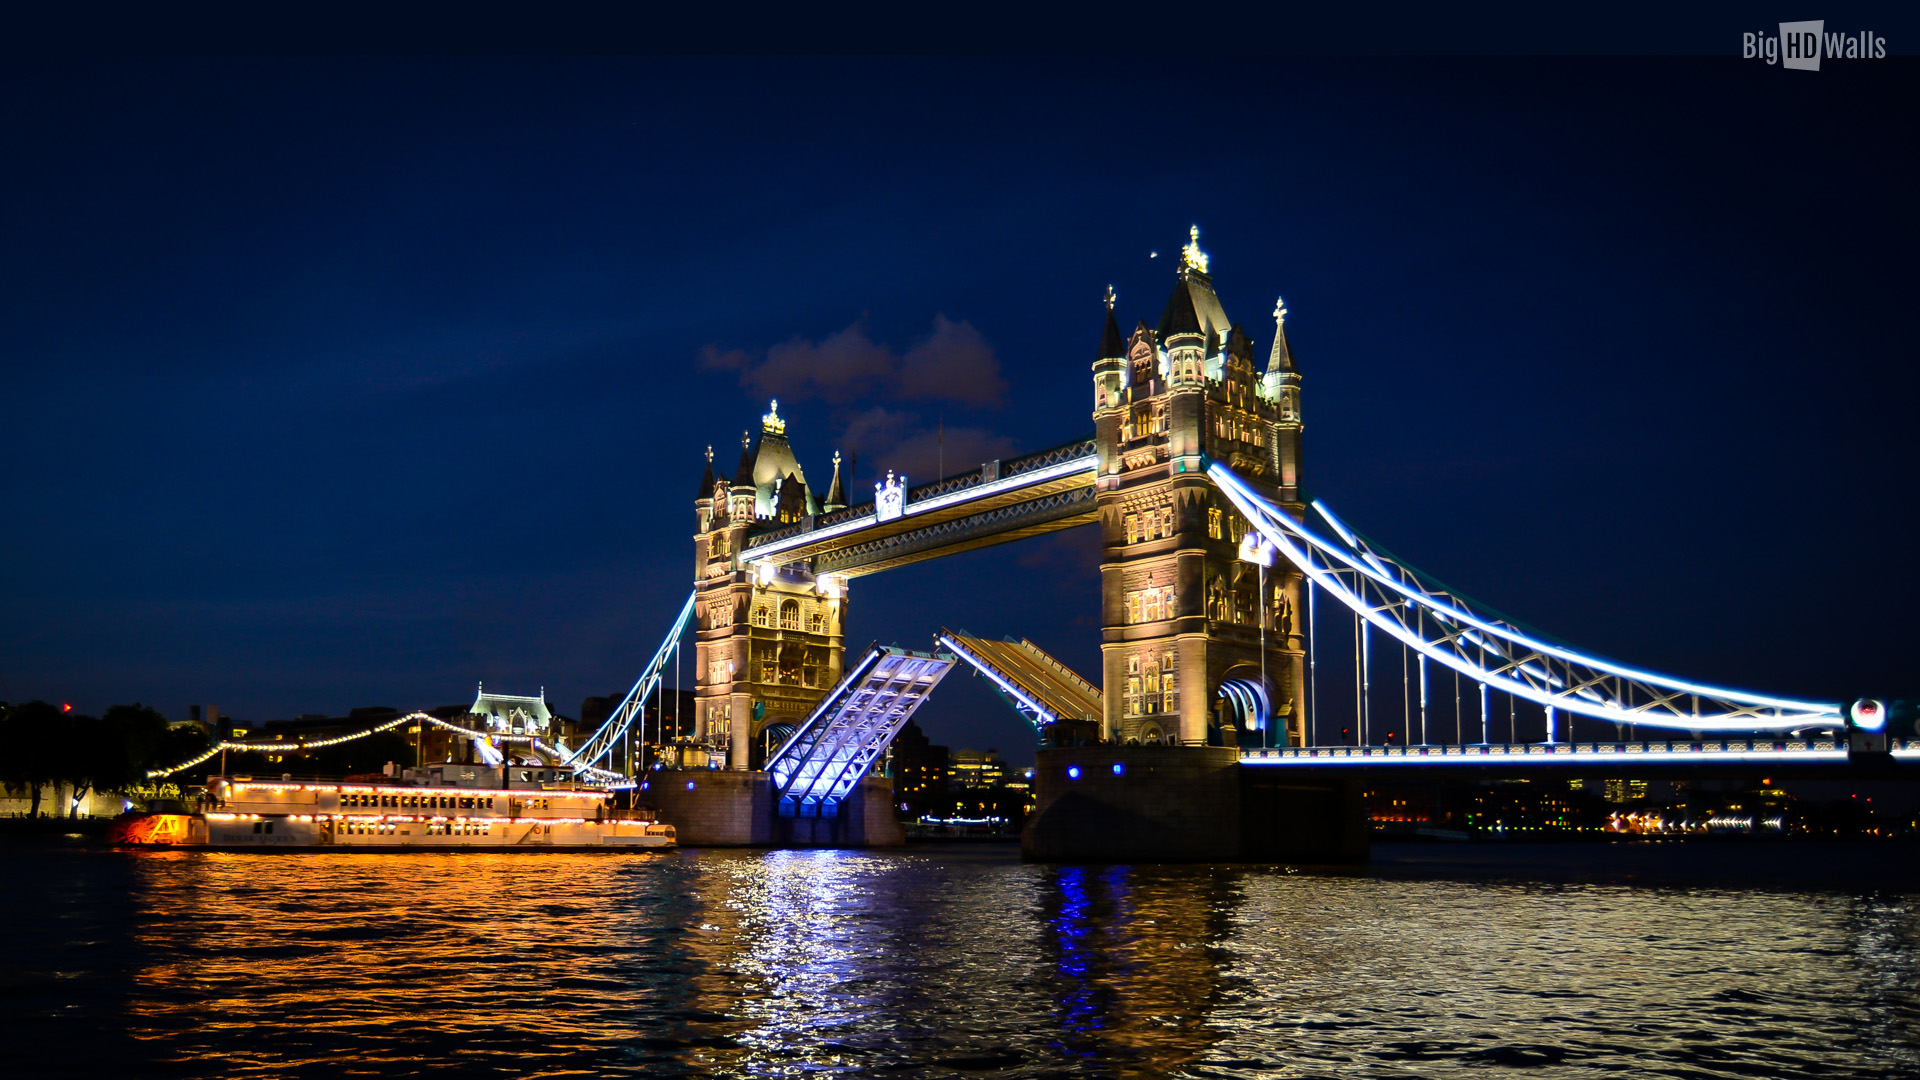 He Tower Bridge All Lit Up At Night And Opened For A Ferry To Pass